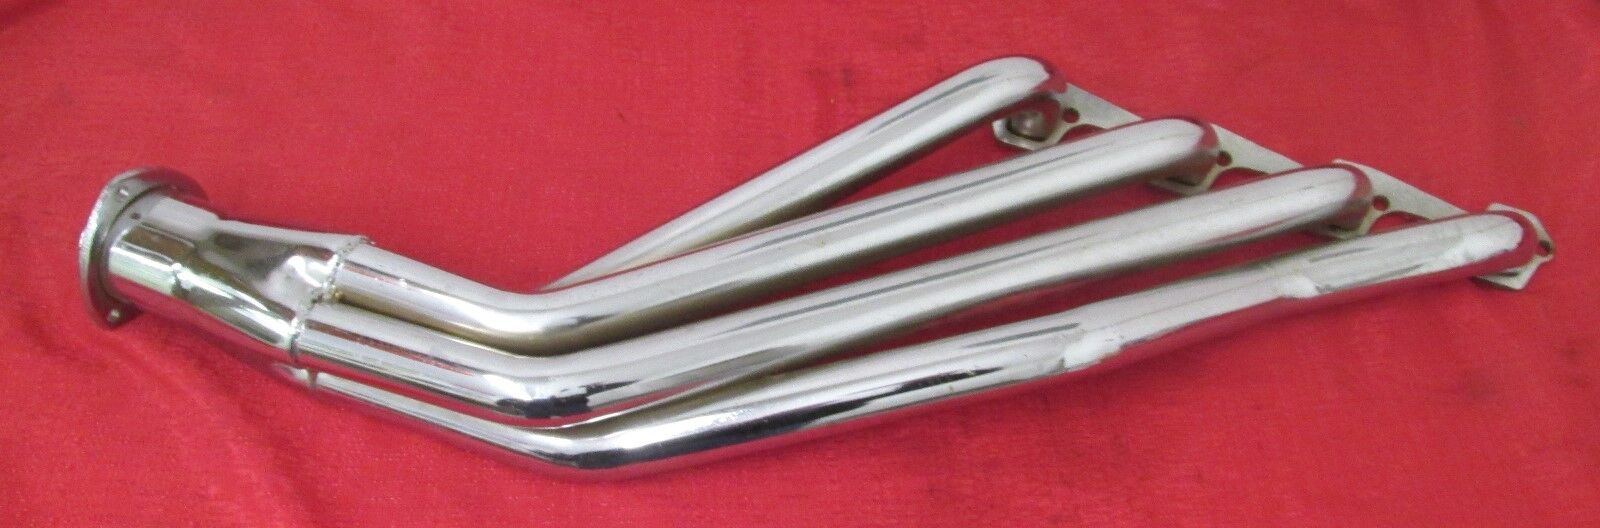 HEADER - FORD MUSTANG - FALCON & OTHERS -1964 UP  RIGHT SIDE ONLY - NEW CHROME